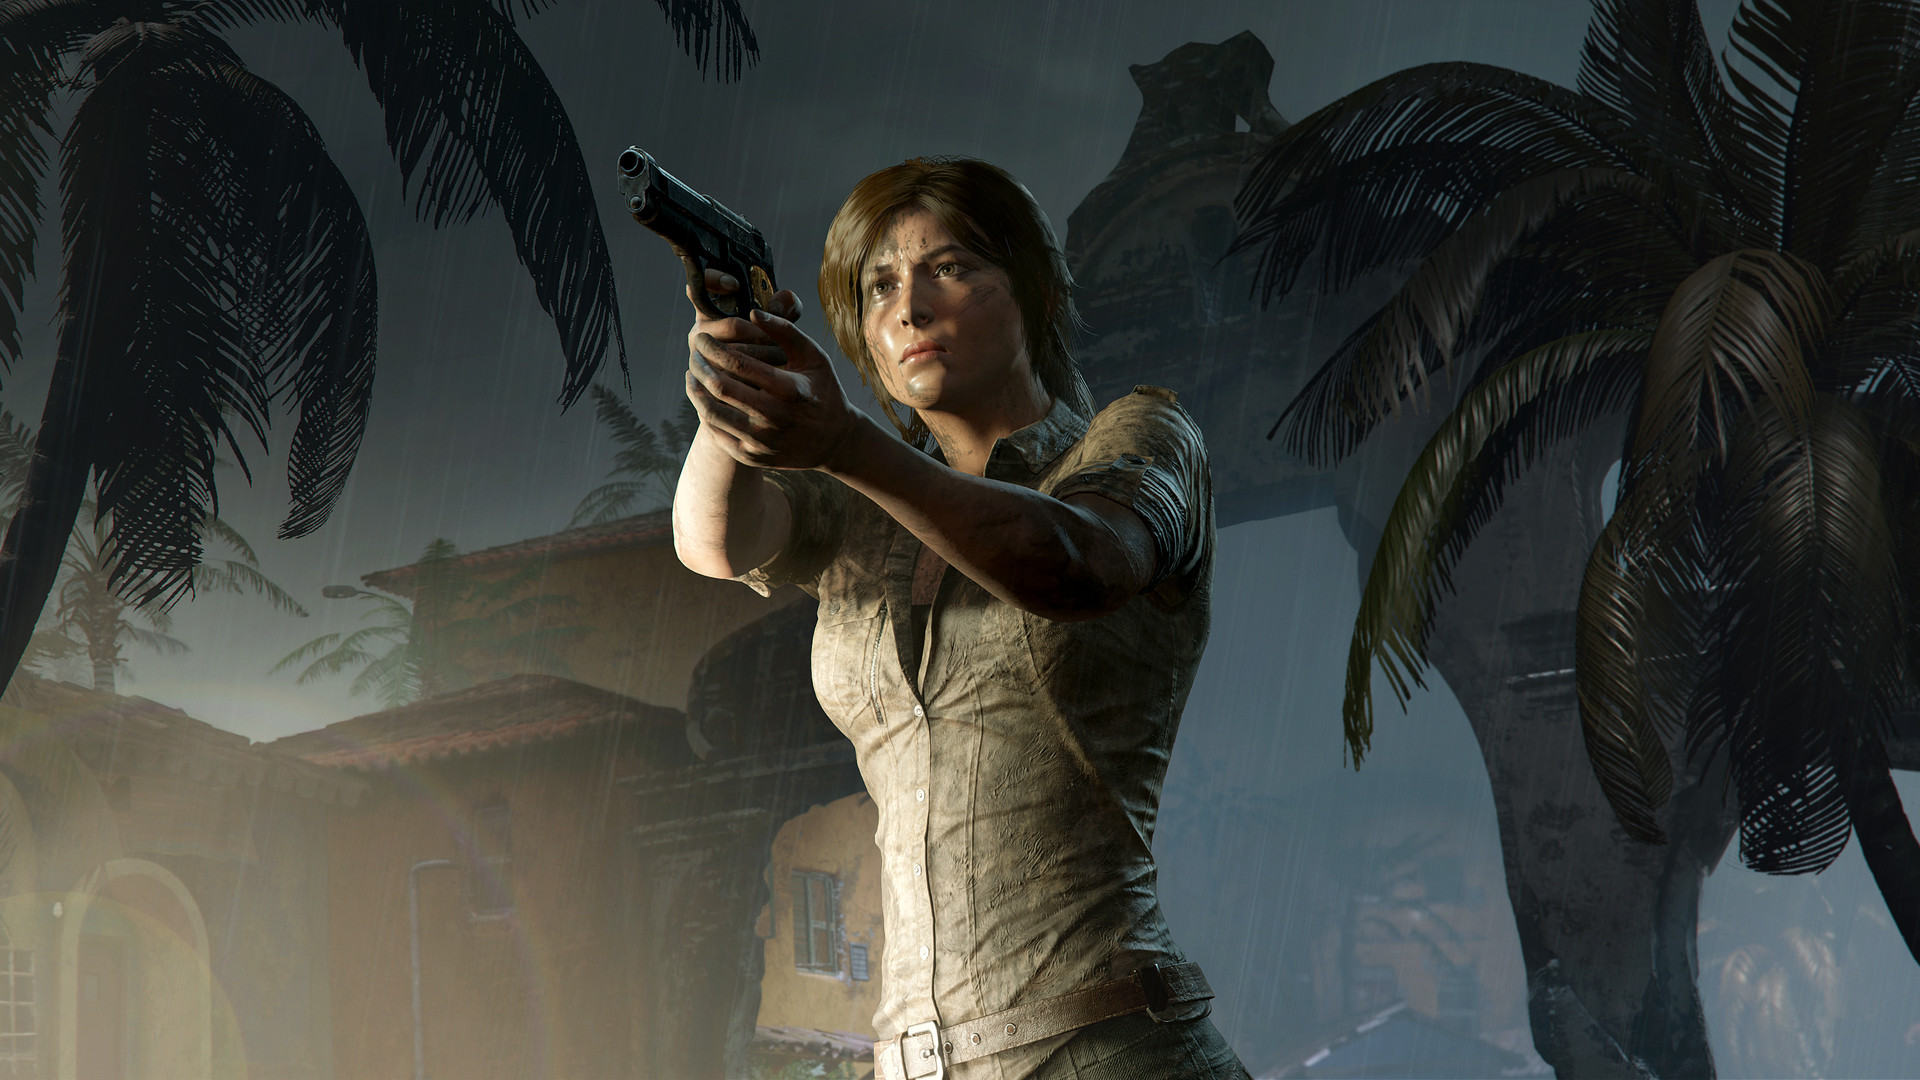 Steam versions of Tomb Raider appear to require Epic logins – but it’s not true